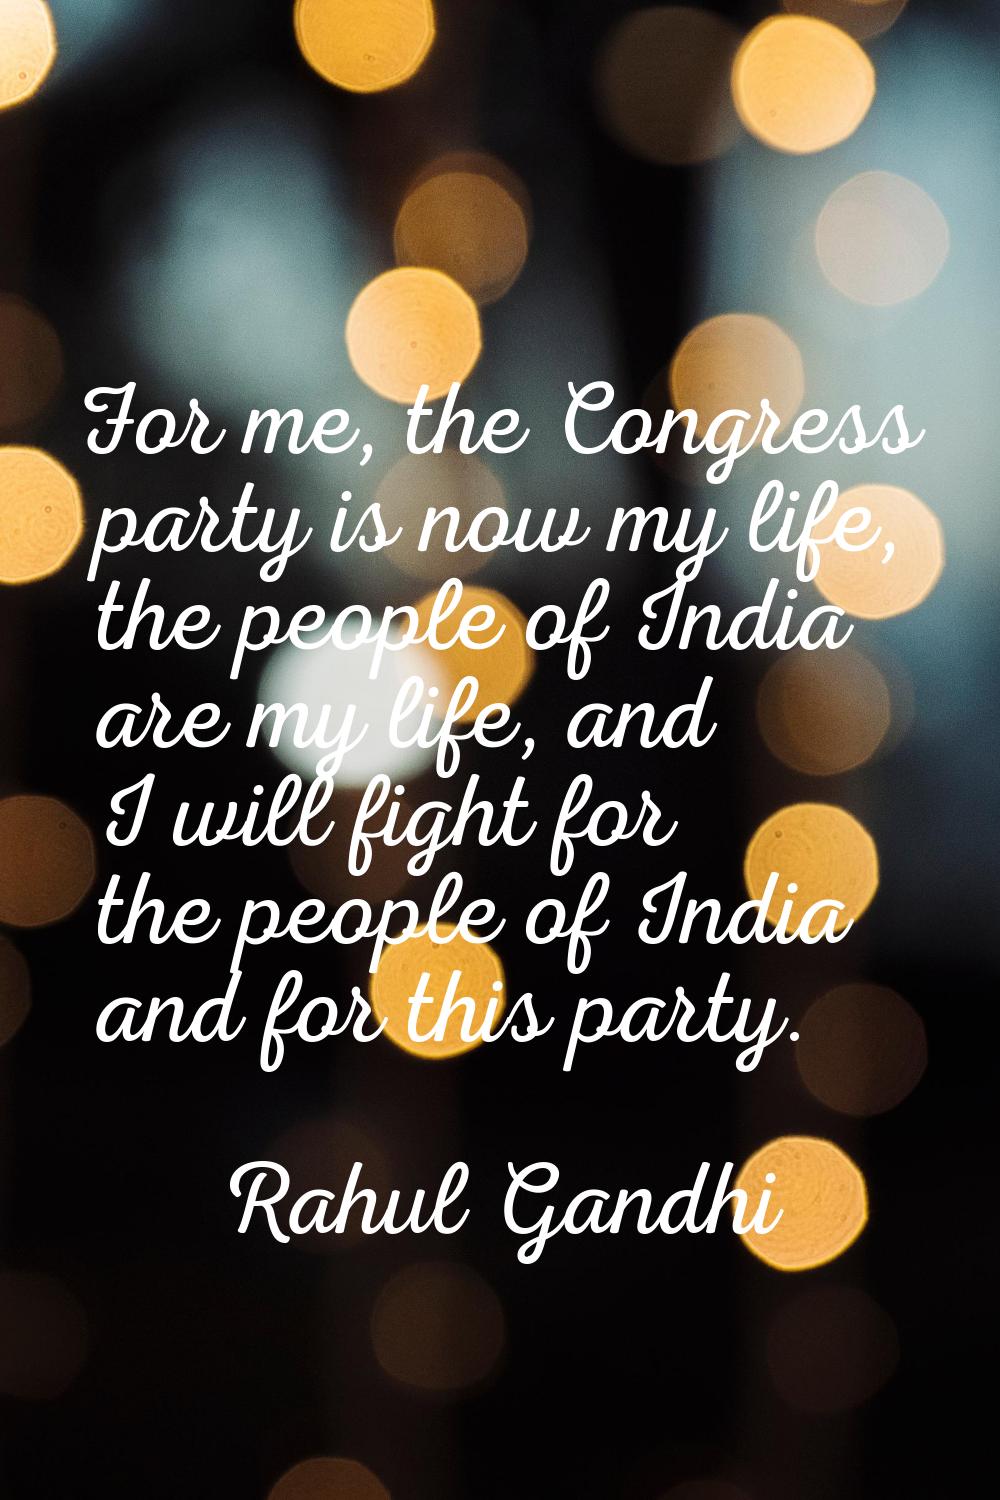 For me, the Congress party is now my life, the people of India are my life, and I will fight for th